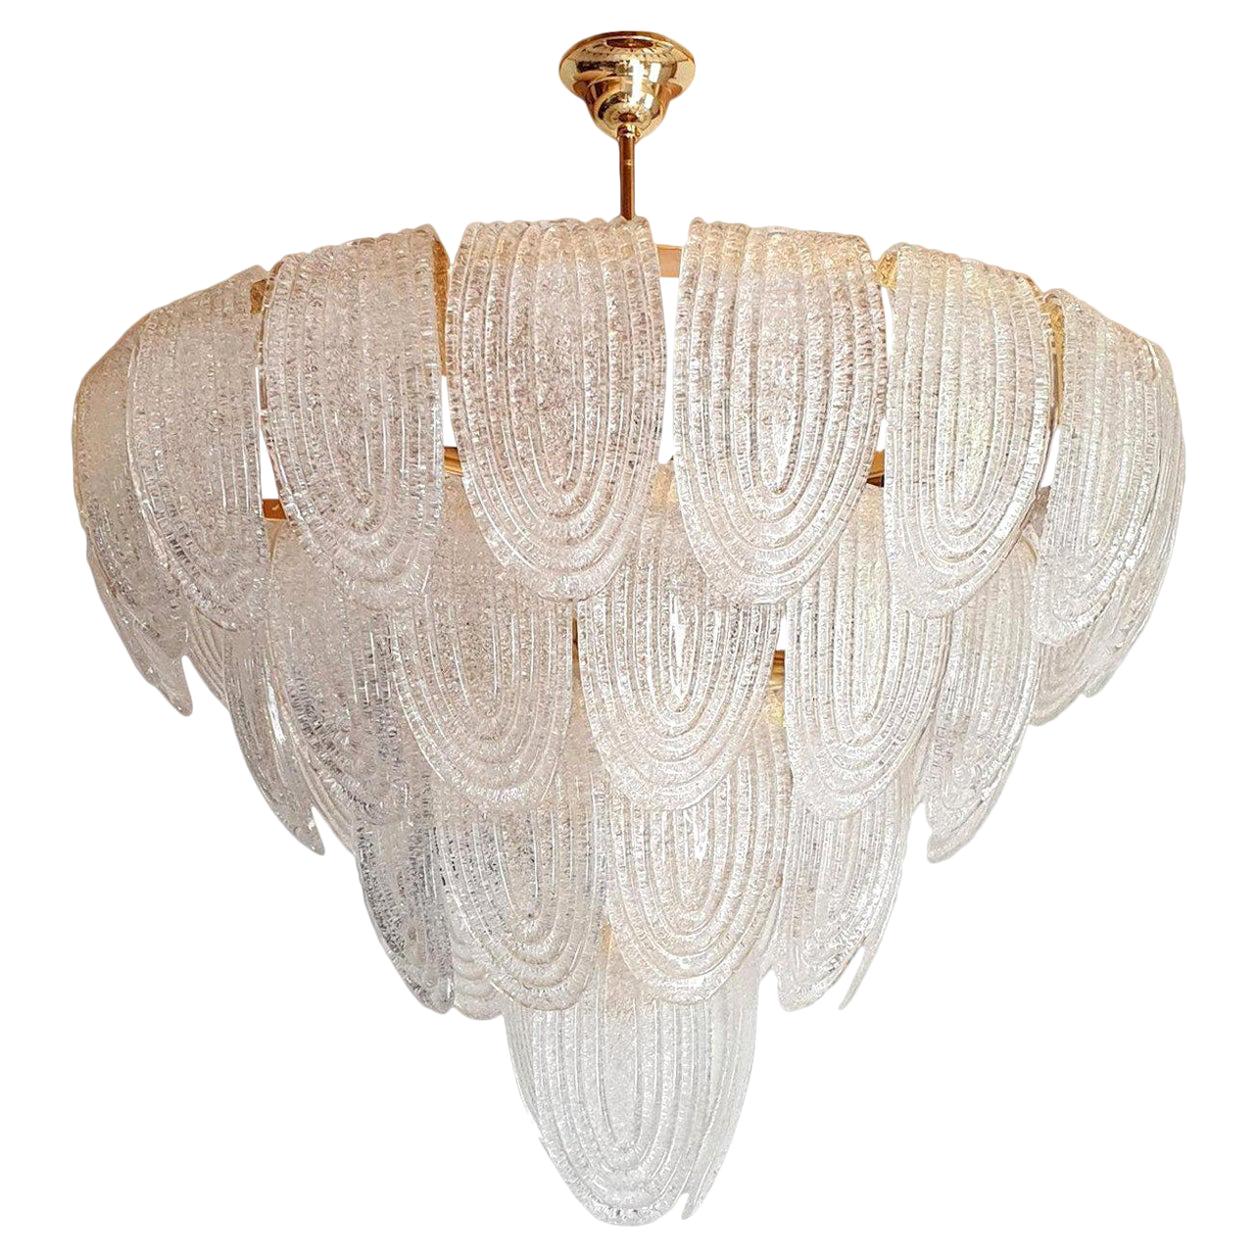 Large Midcentury Clear Murano Glass & Gold Plated Chandelier Mazzega Style Italy